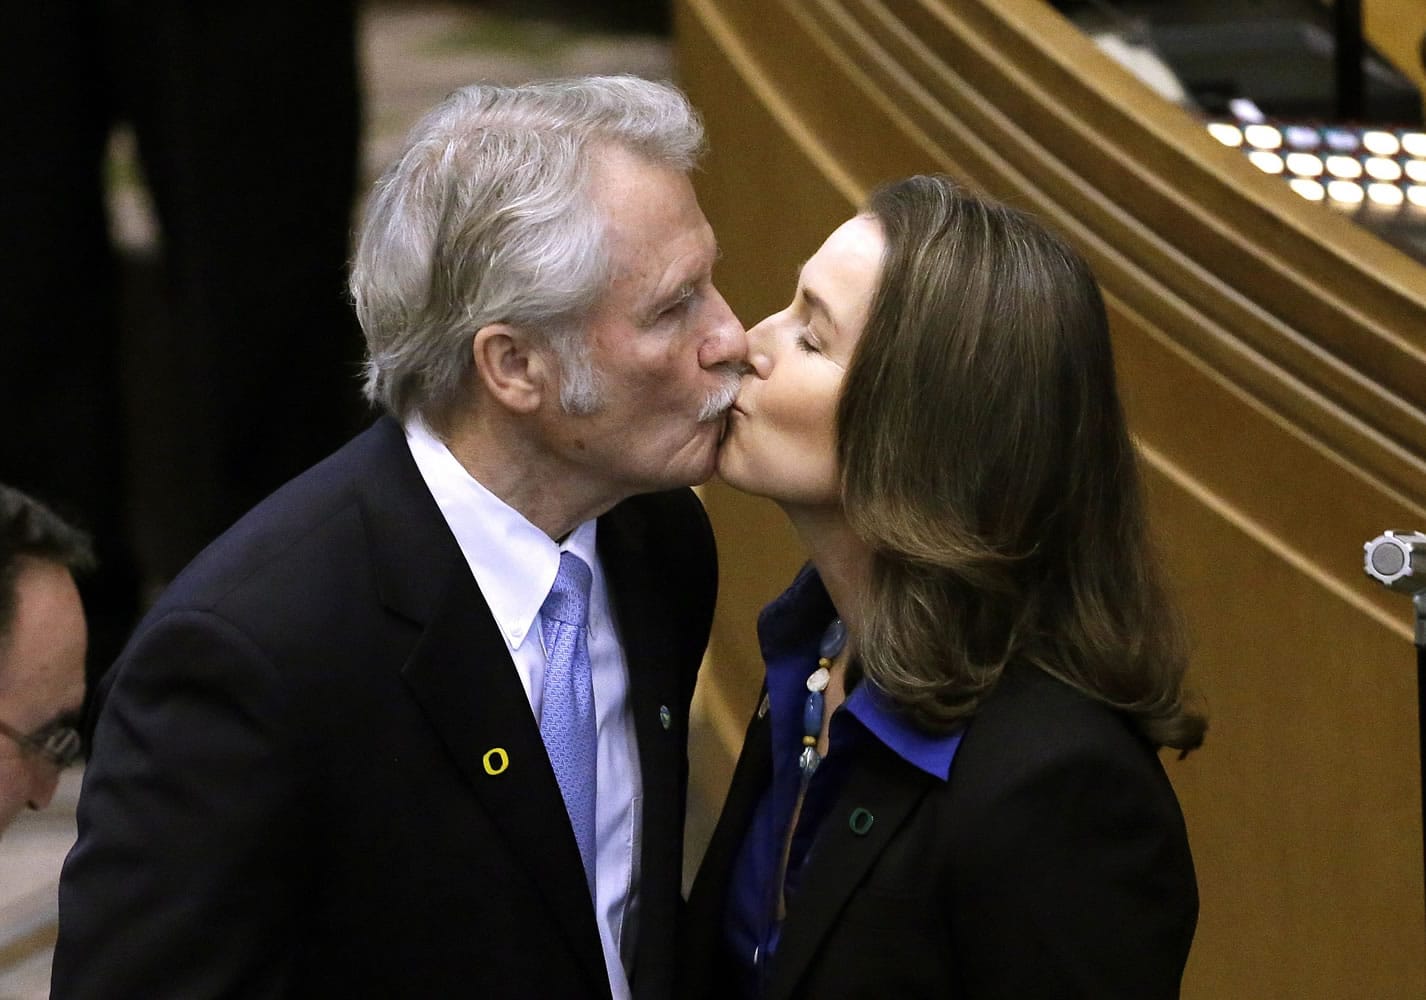 Oregon Gov. John Kitzhaber kisses fiancee, Cylvia Hayes, Jan. 12 after he is sworn in for an unprecedented fourth term as governor in Salem, Ore.